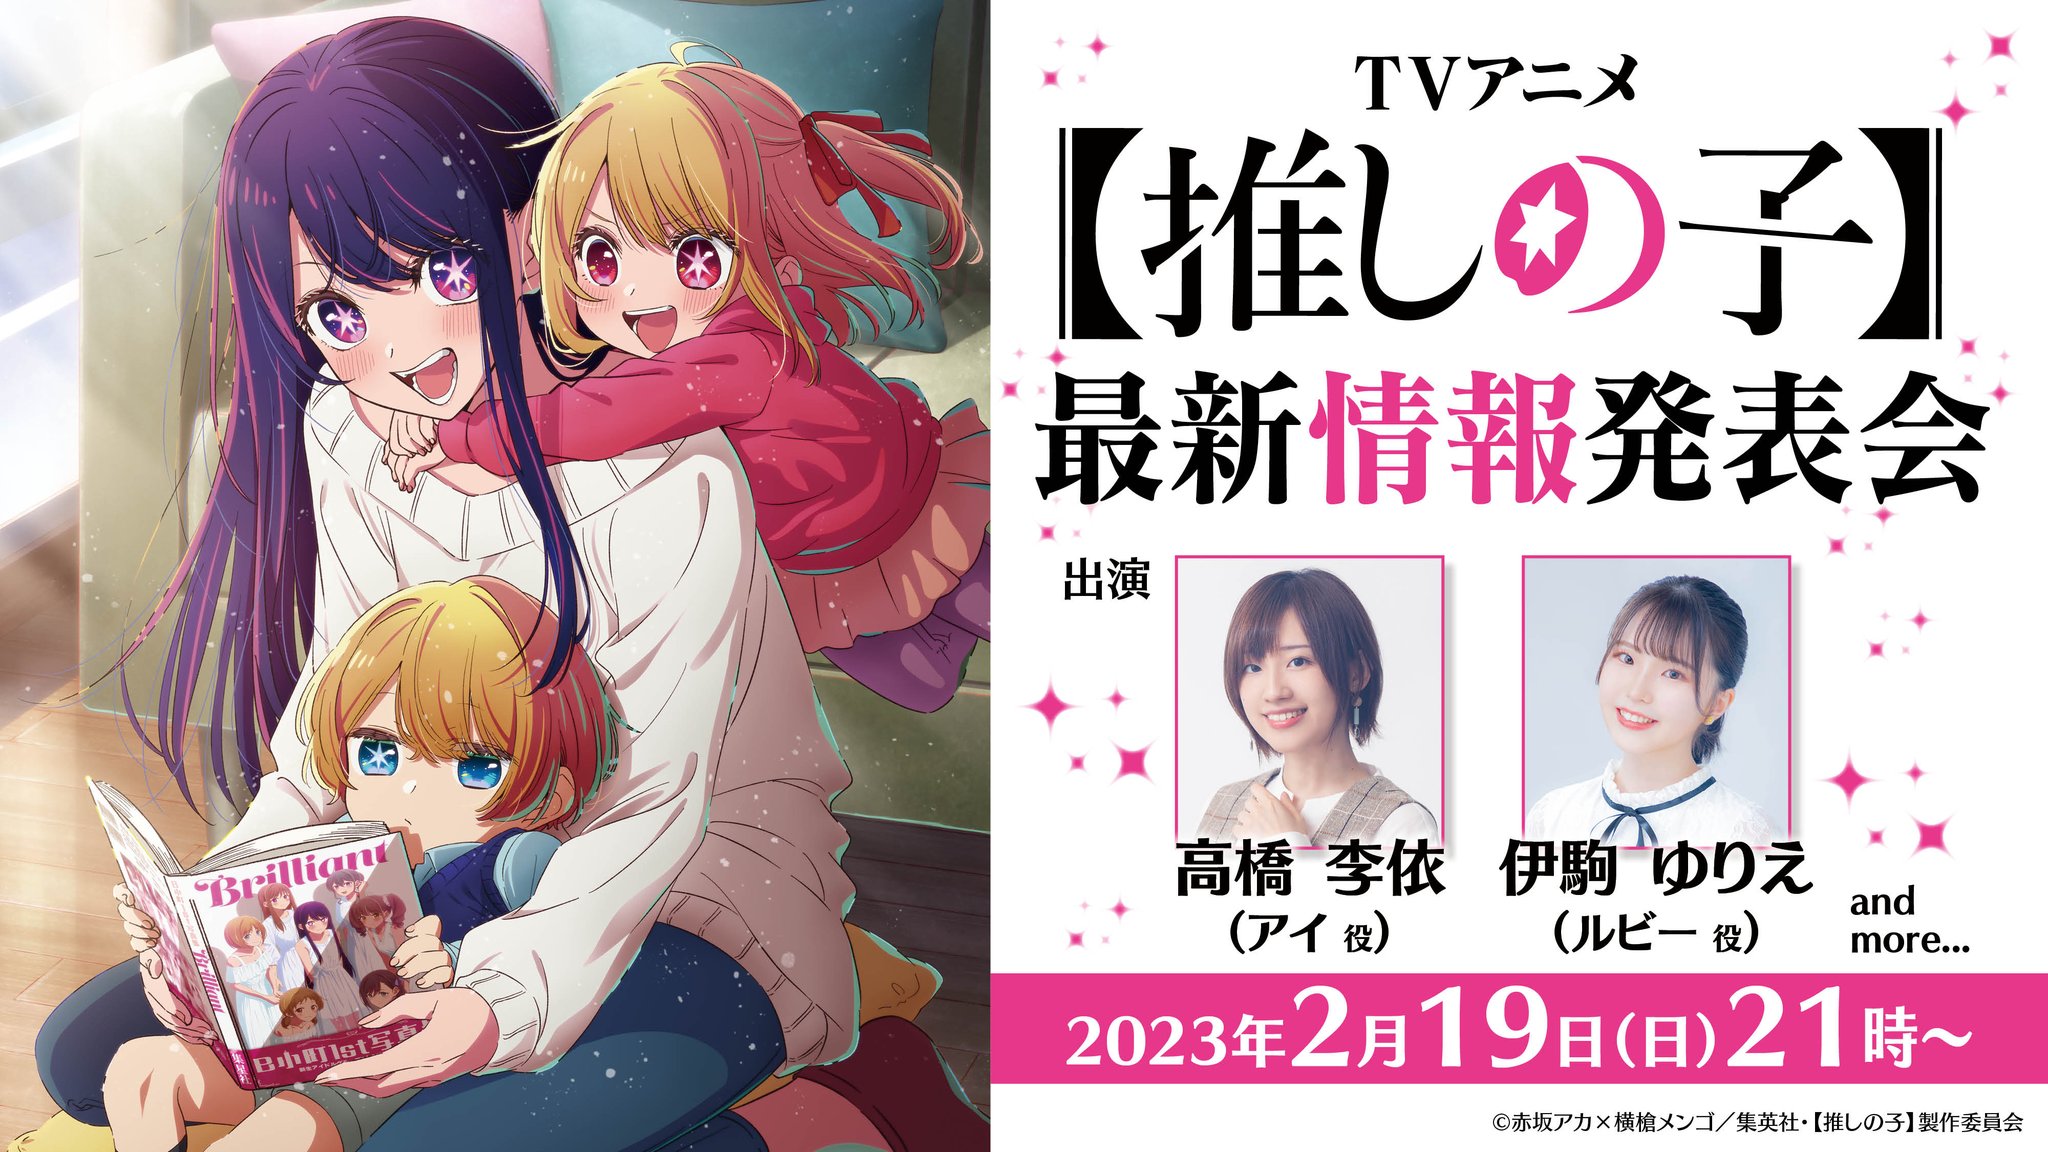 Oshi no Ko Anime Special Update Livestream to Be Held In Late February